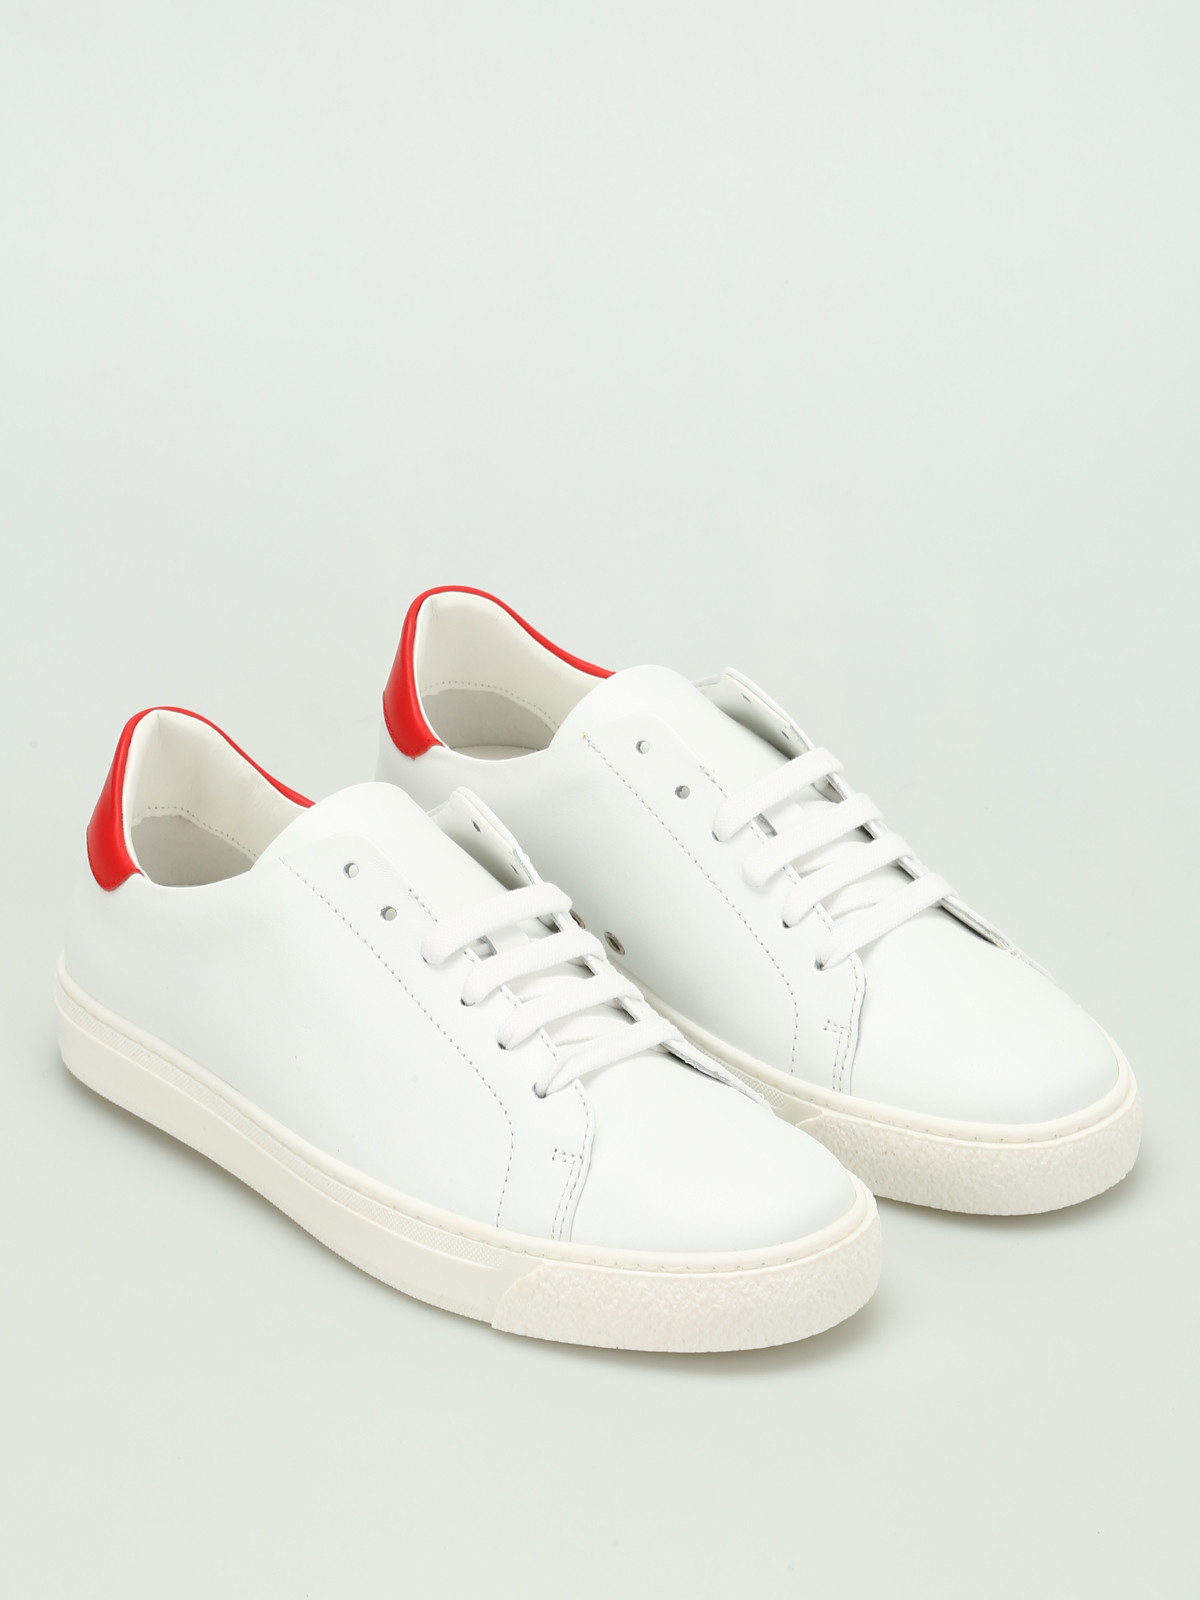 Trainers Anya Hindmarch - Wink in Tennis shoes